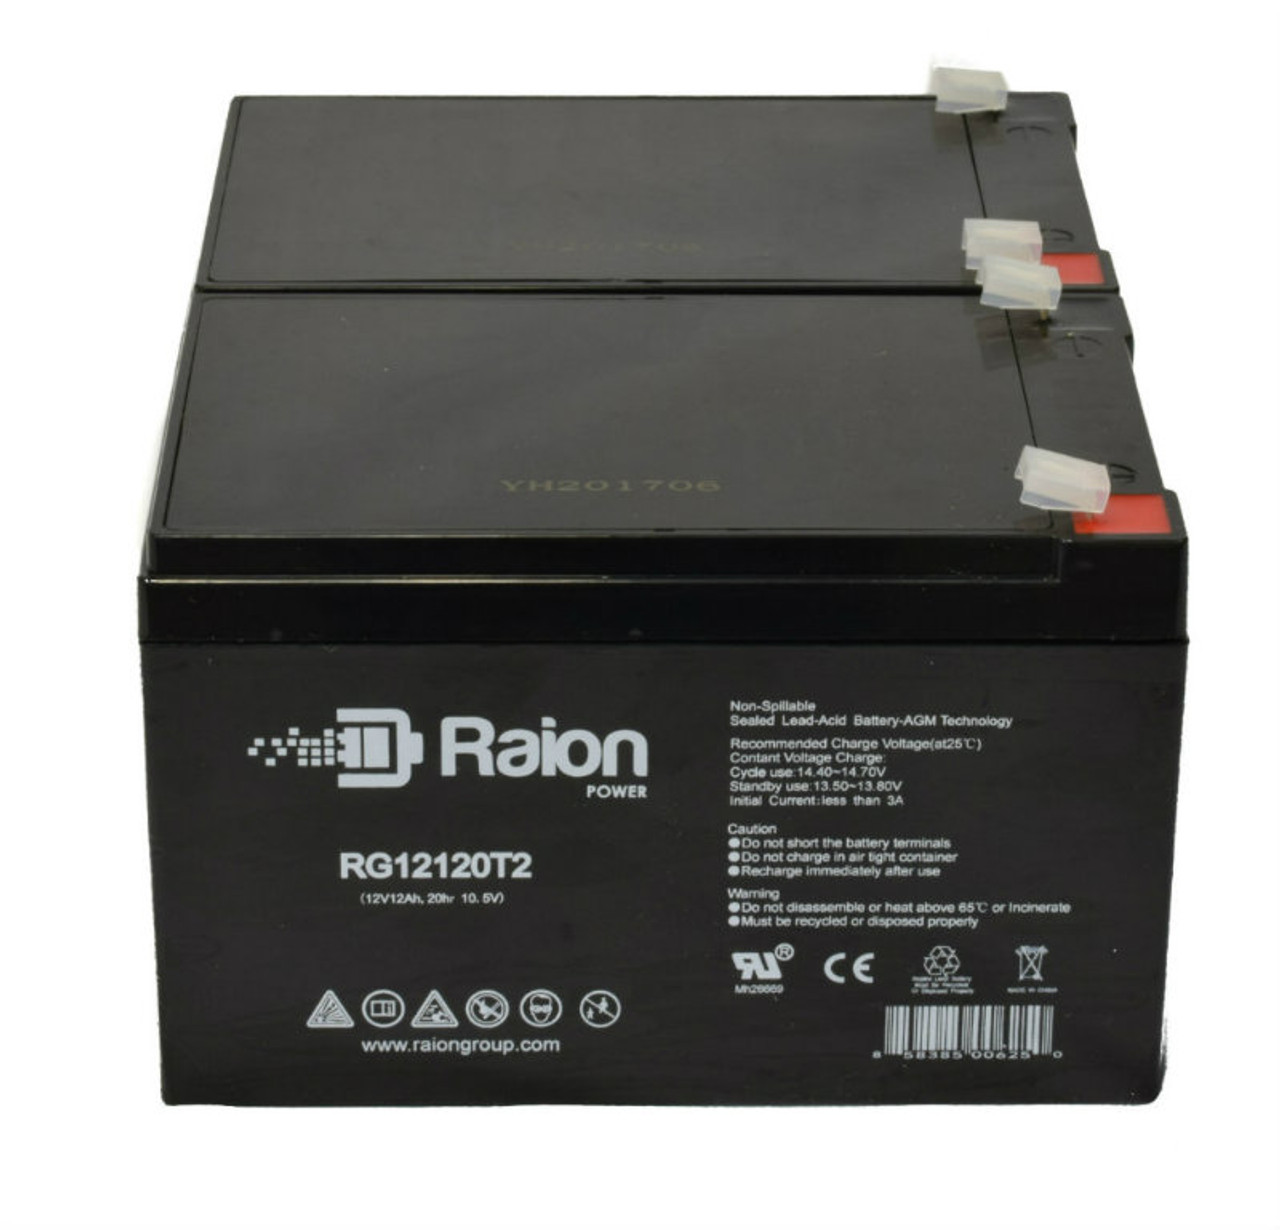 Raion Power 12V 12Ah Non-Spillable Compatible Replacement Battery for Sigmas SP12-12HR - (2 Pack)